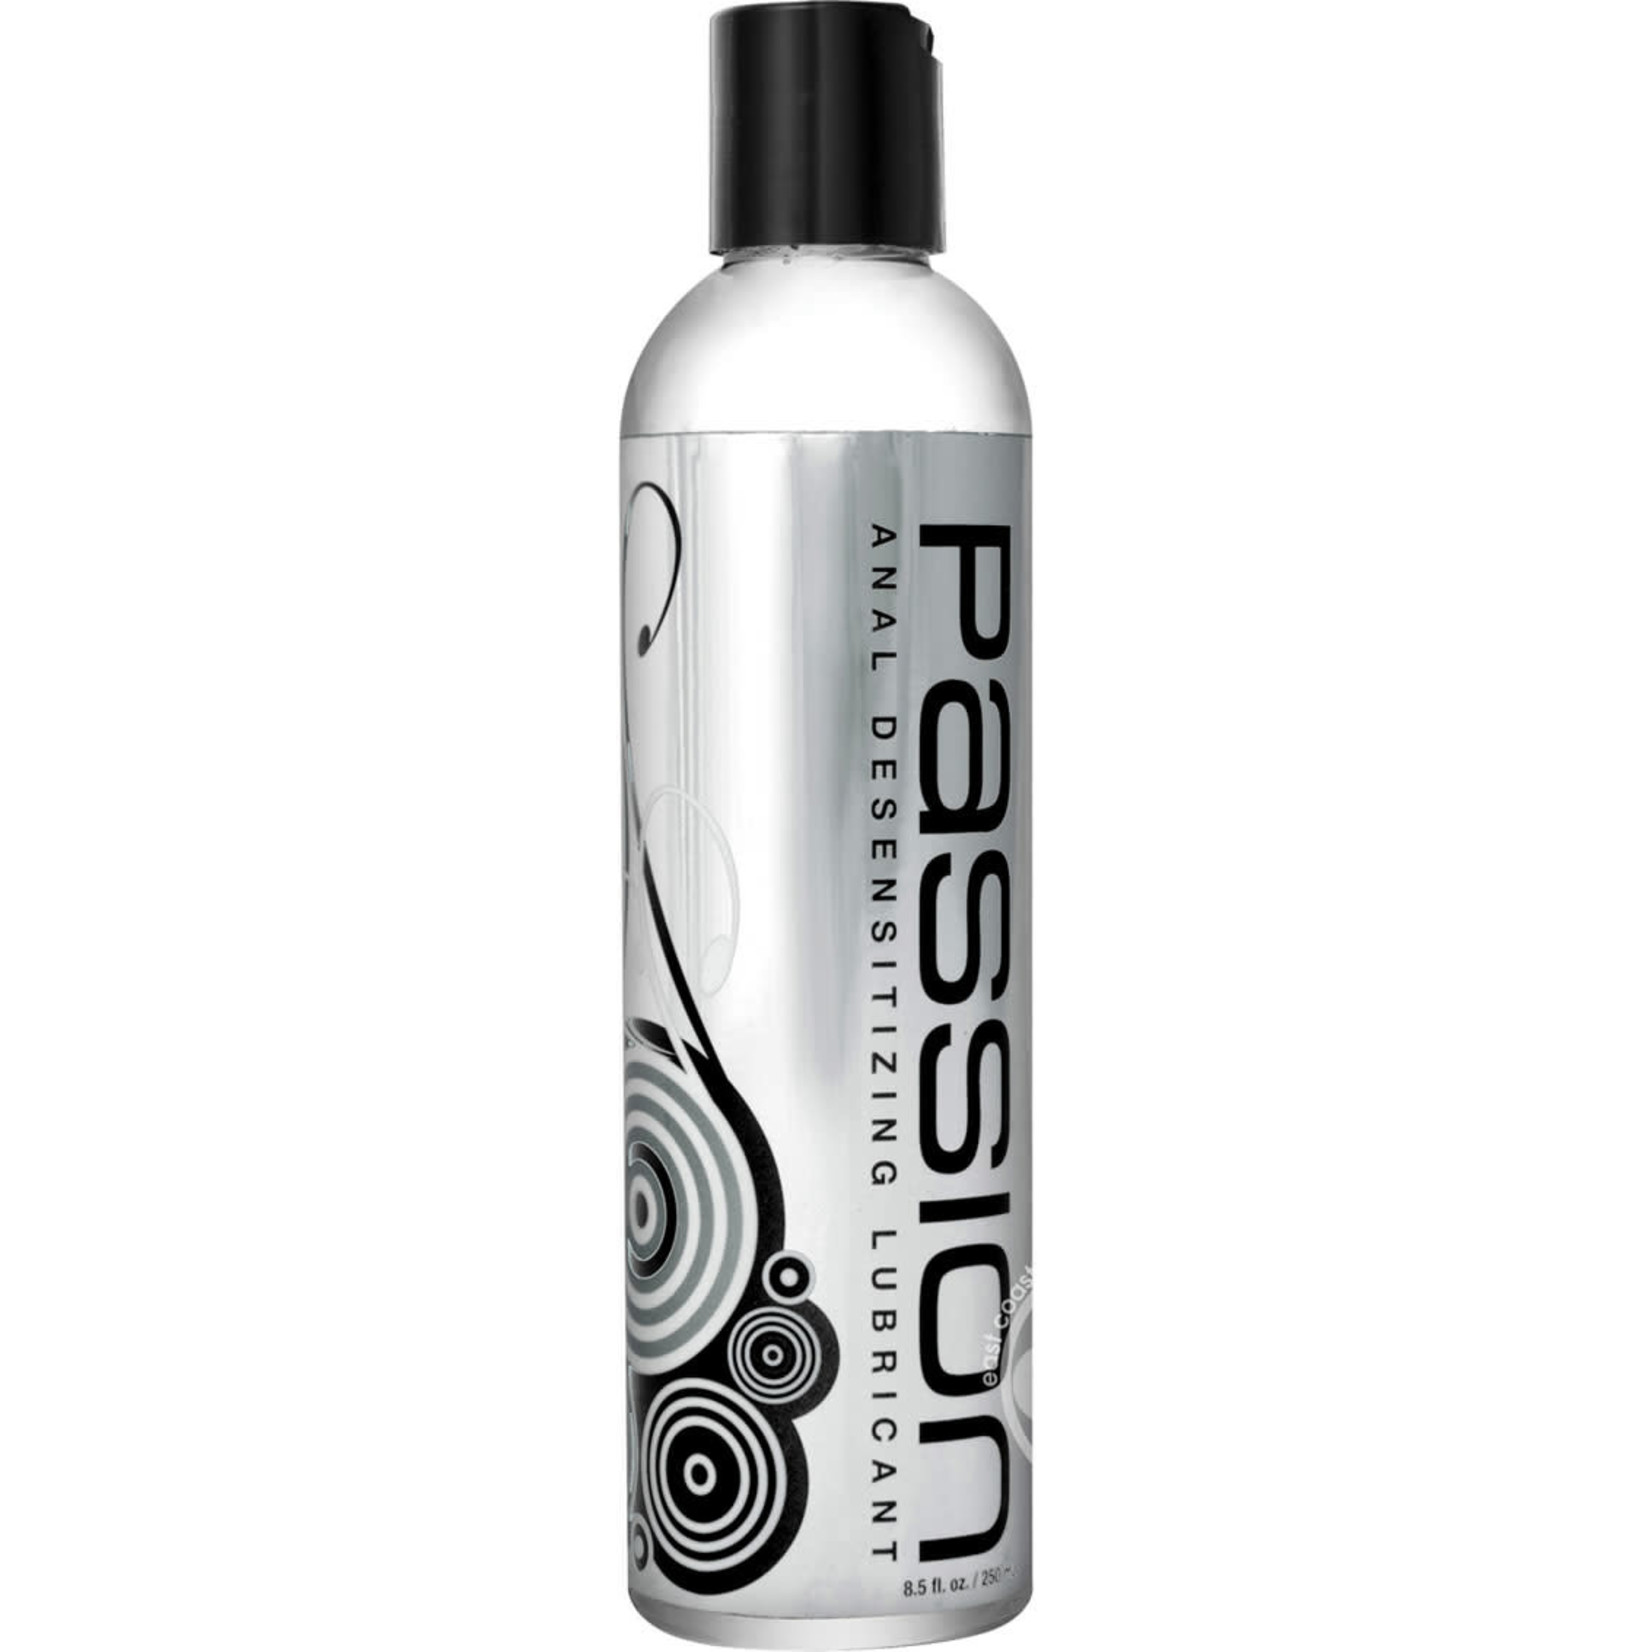 Passion Anal Desensitizing Water Based Lubricant With Lidocaine 8.5oz